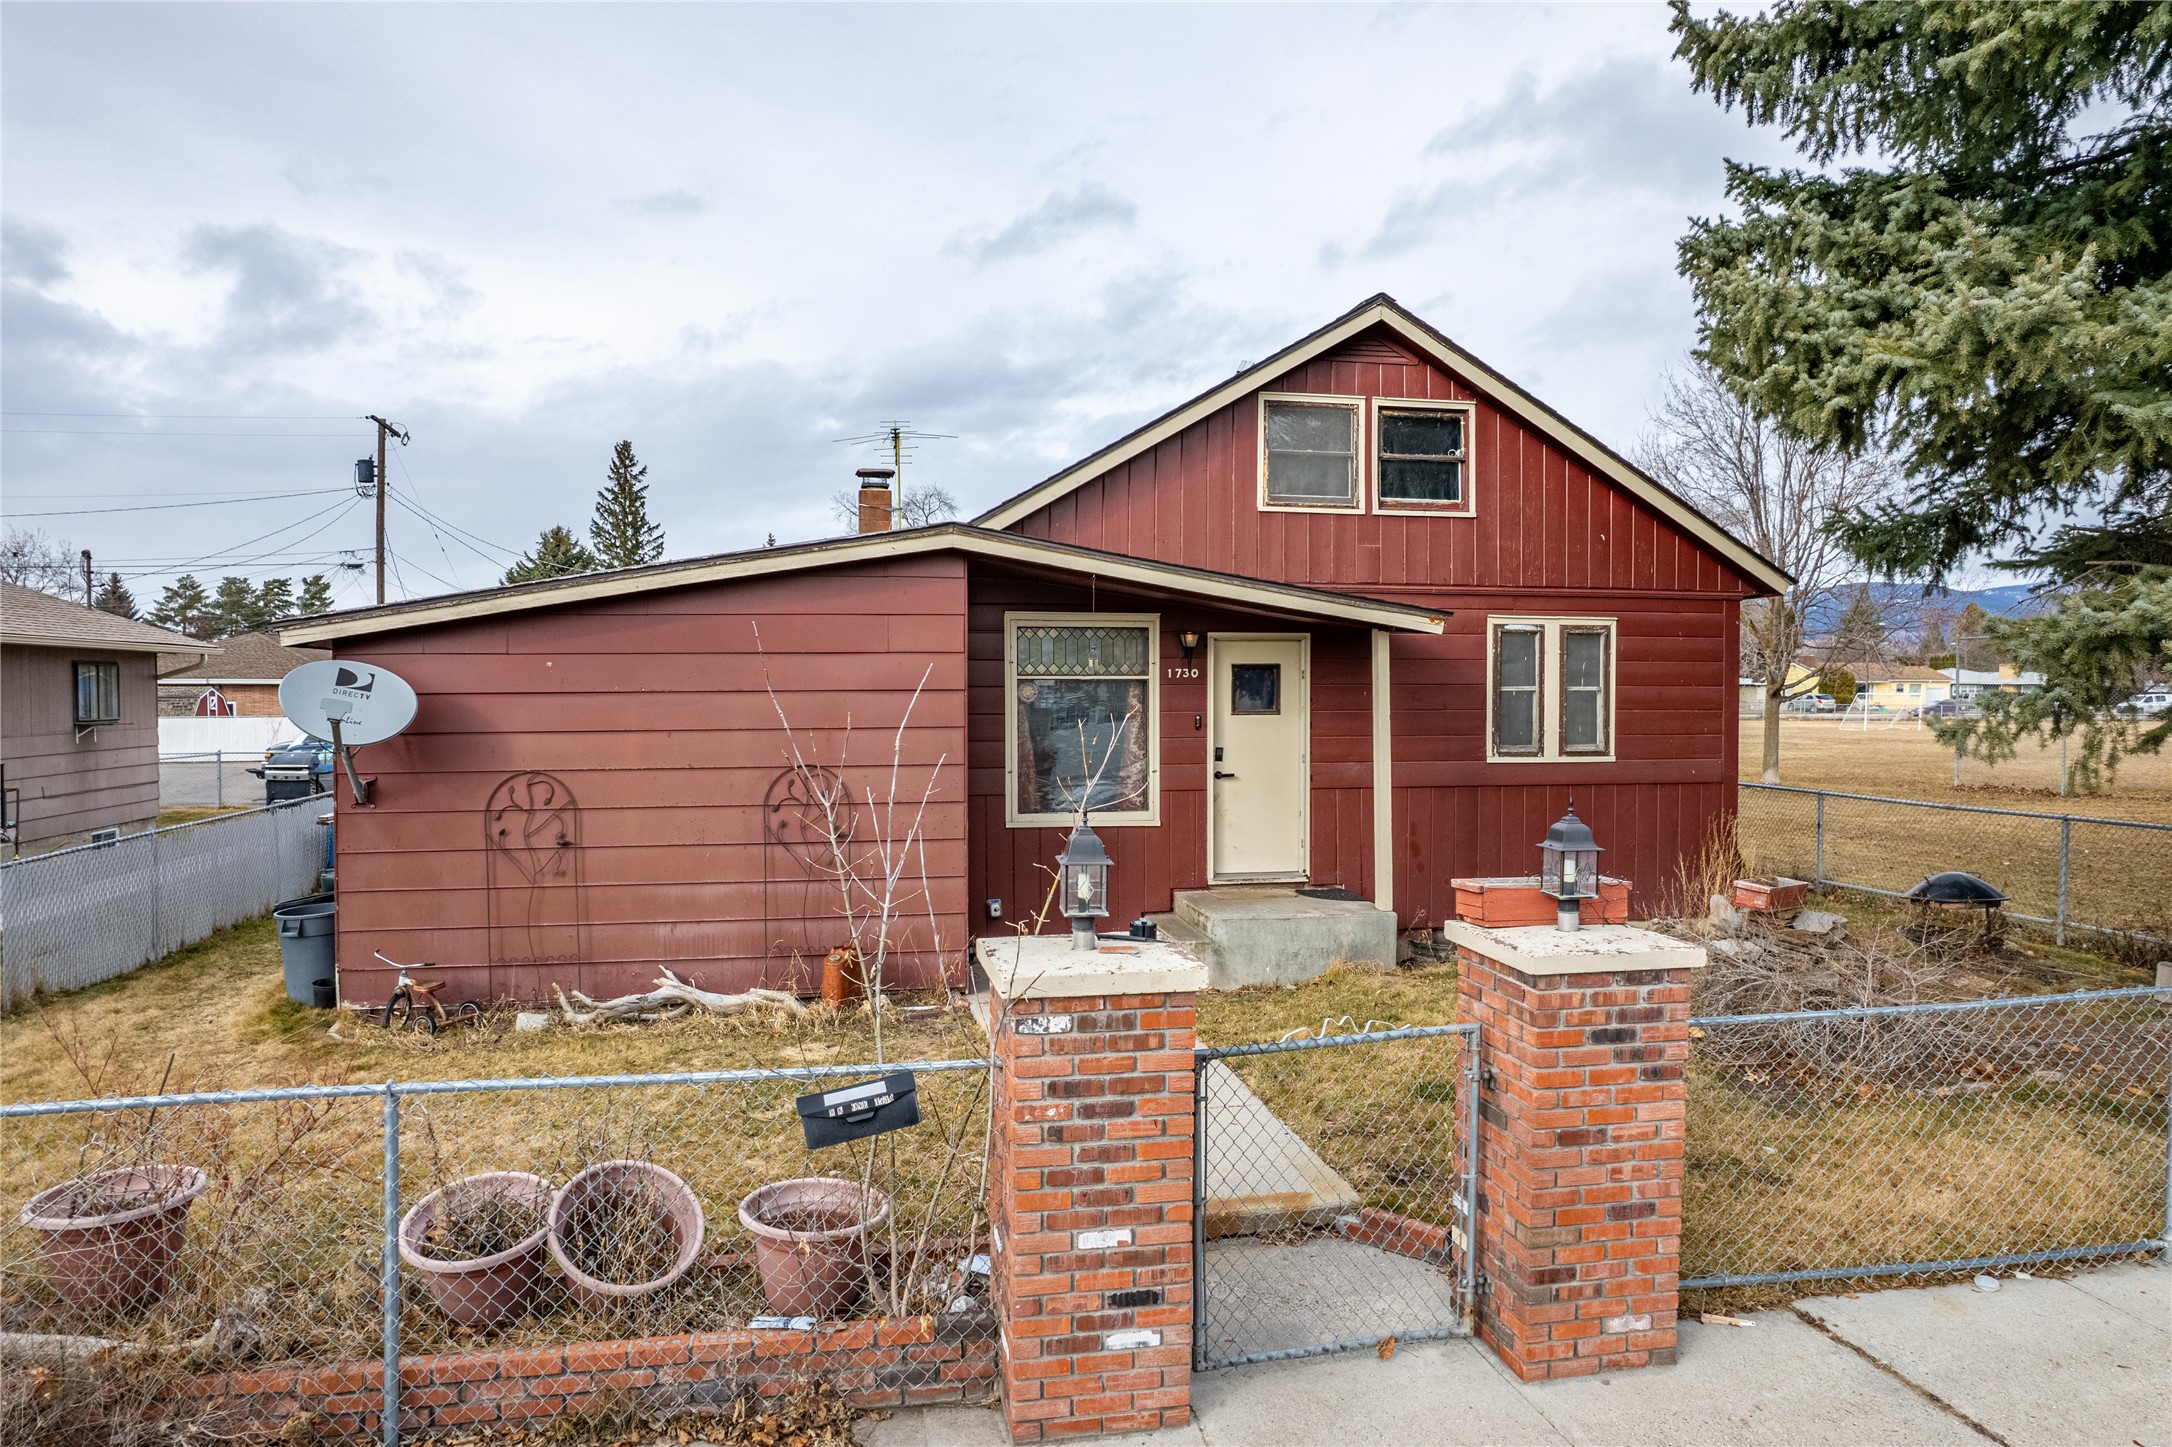 This 4 bedroom, 2 bathroom home is located in the Central Missoula, close to Southgate Mall and Community Hospital. Located at the end of a street backing up to a park and has a large backyard. The lot has the ability to add more units! Walk into the fenced yard and through the front door to your new living room. Underneath the carpet is hardwood floors! Two bedrooms and a full bathroom are on the main floor. LVP flooring has recently been laid in the kitchen with new appliances. Upstairs is an addition bedroom, office and full bathroom. The basement is ready for your creative updates as most of it is unfinished. Laundry and one bedroom are located on this floor. Call Danni Moore 406-396-2442, or your real estate professional to schedule a private​​‌​​​​‌​​‌‌​‌‌‌​​‌‌​‌‌‌​​‌‌​‌‌‌ showing.